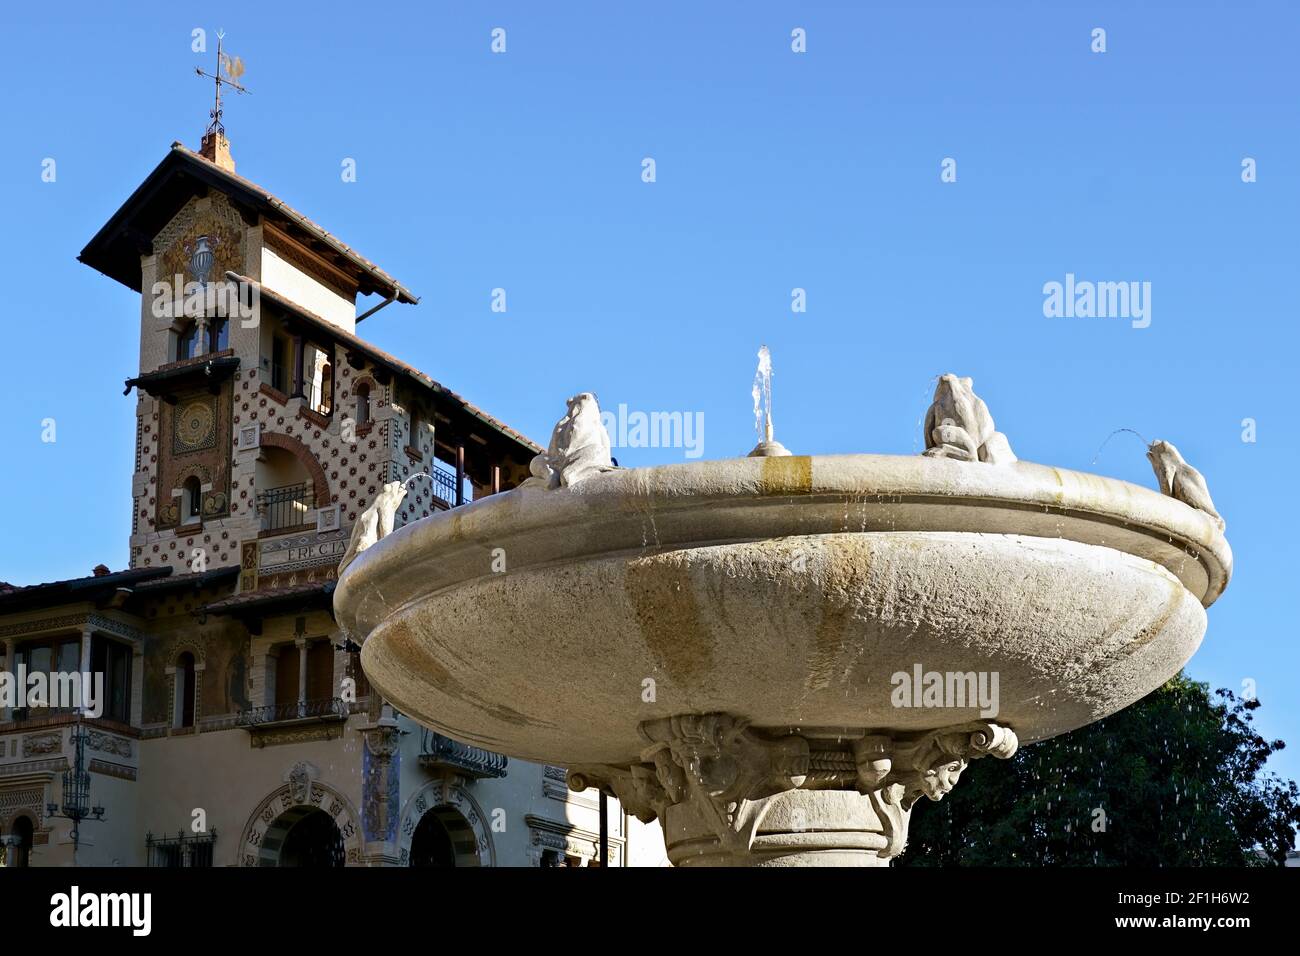 Fountain of frogs and the House of the fairies. Architect Gino Coppedè. Art Deco style. Mincio Square, Coppedè neighborhood. Rome, Italy. Copy space Stock Photo